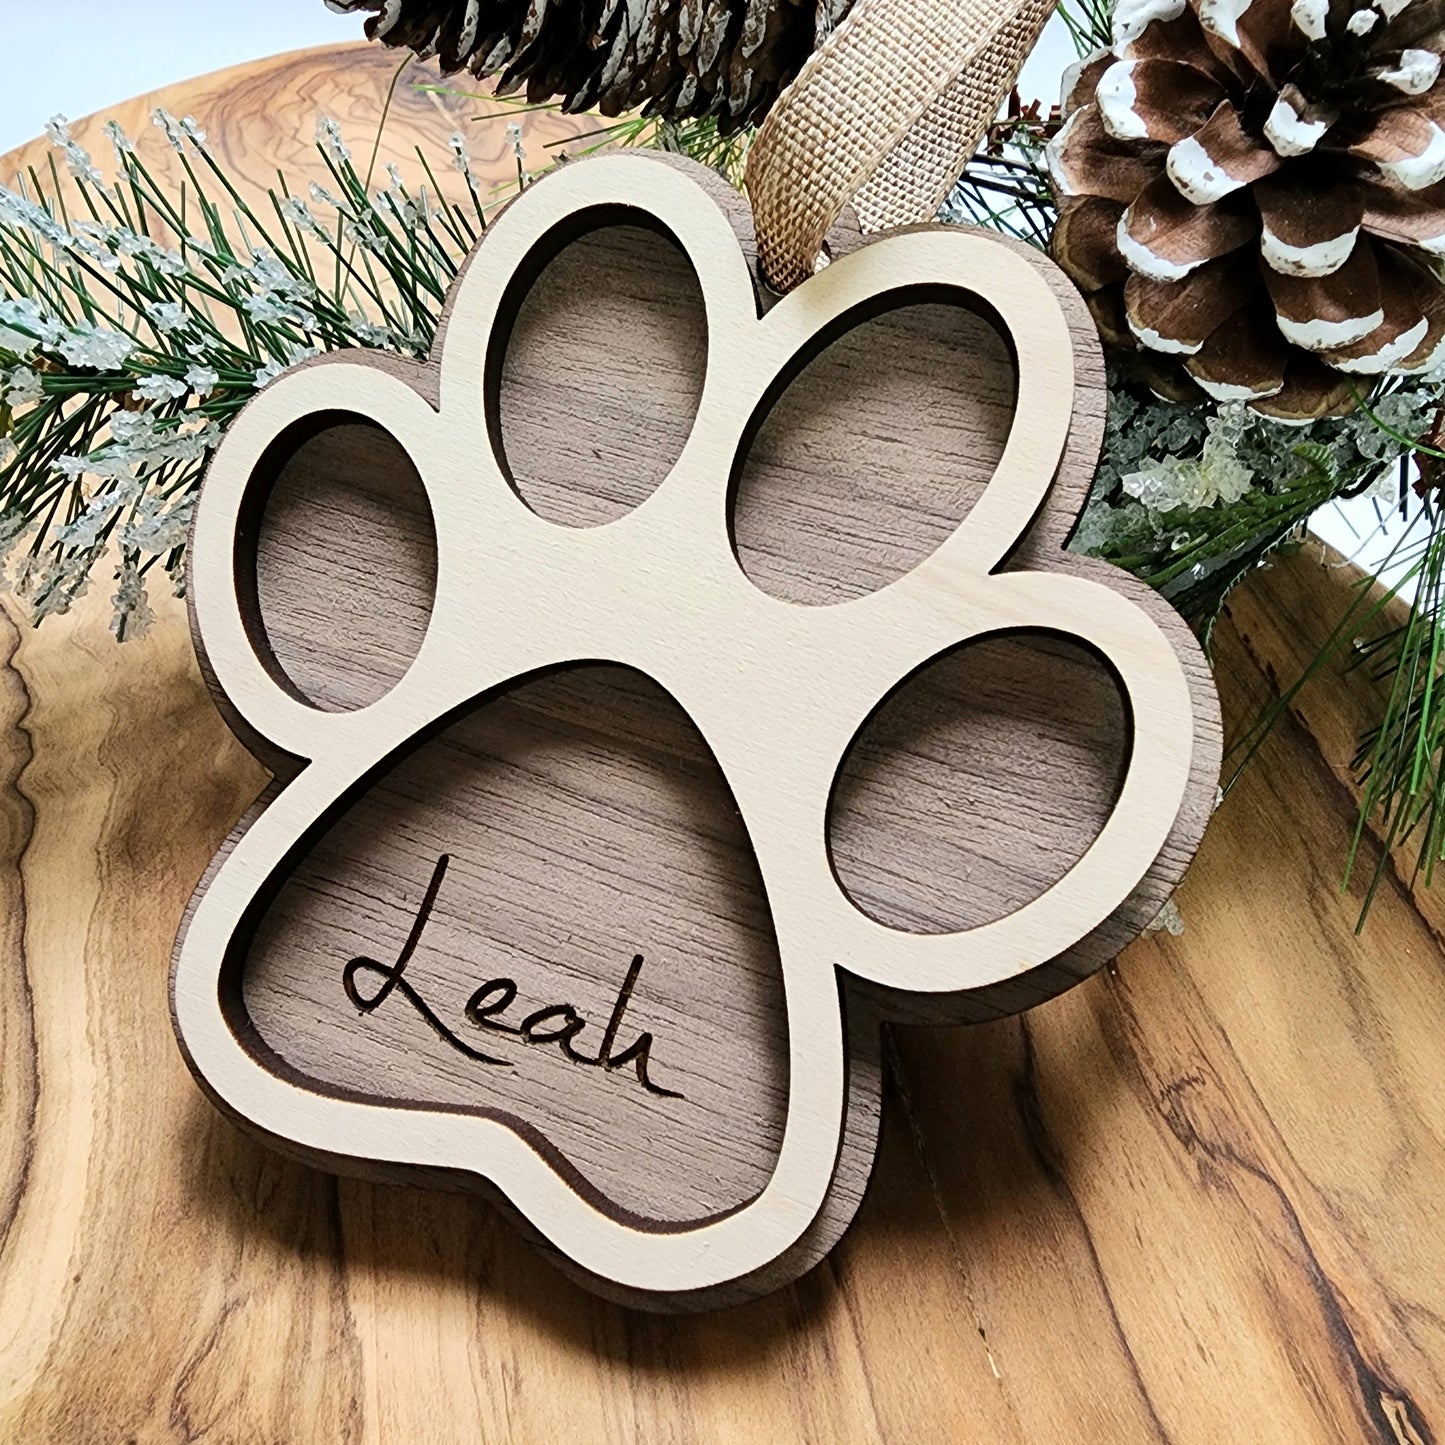 Cat Paw Ornament with Pet name engraved